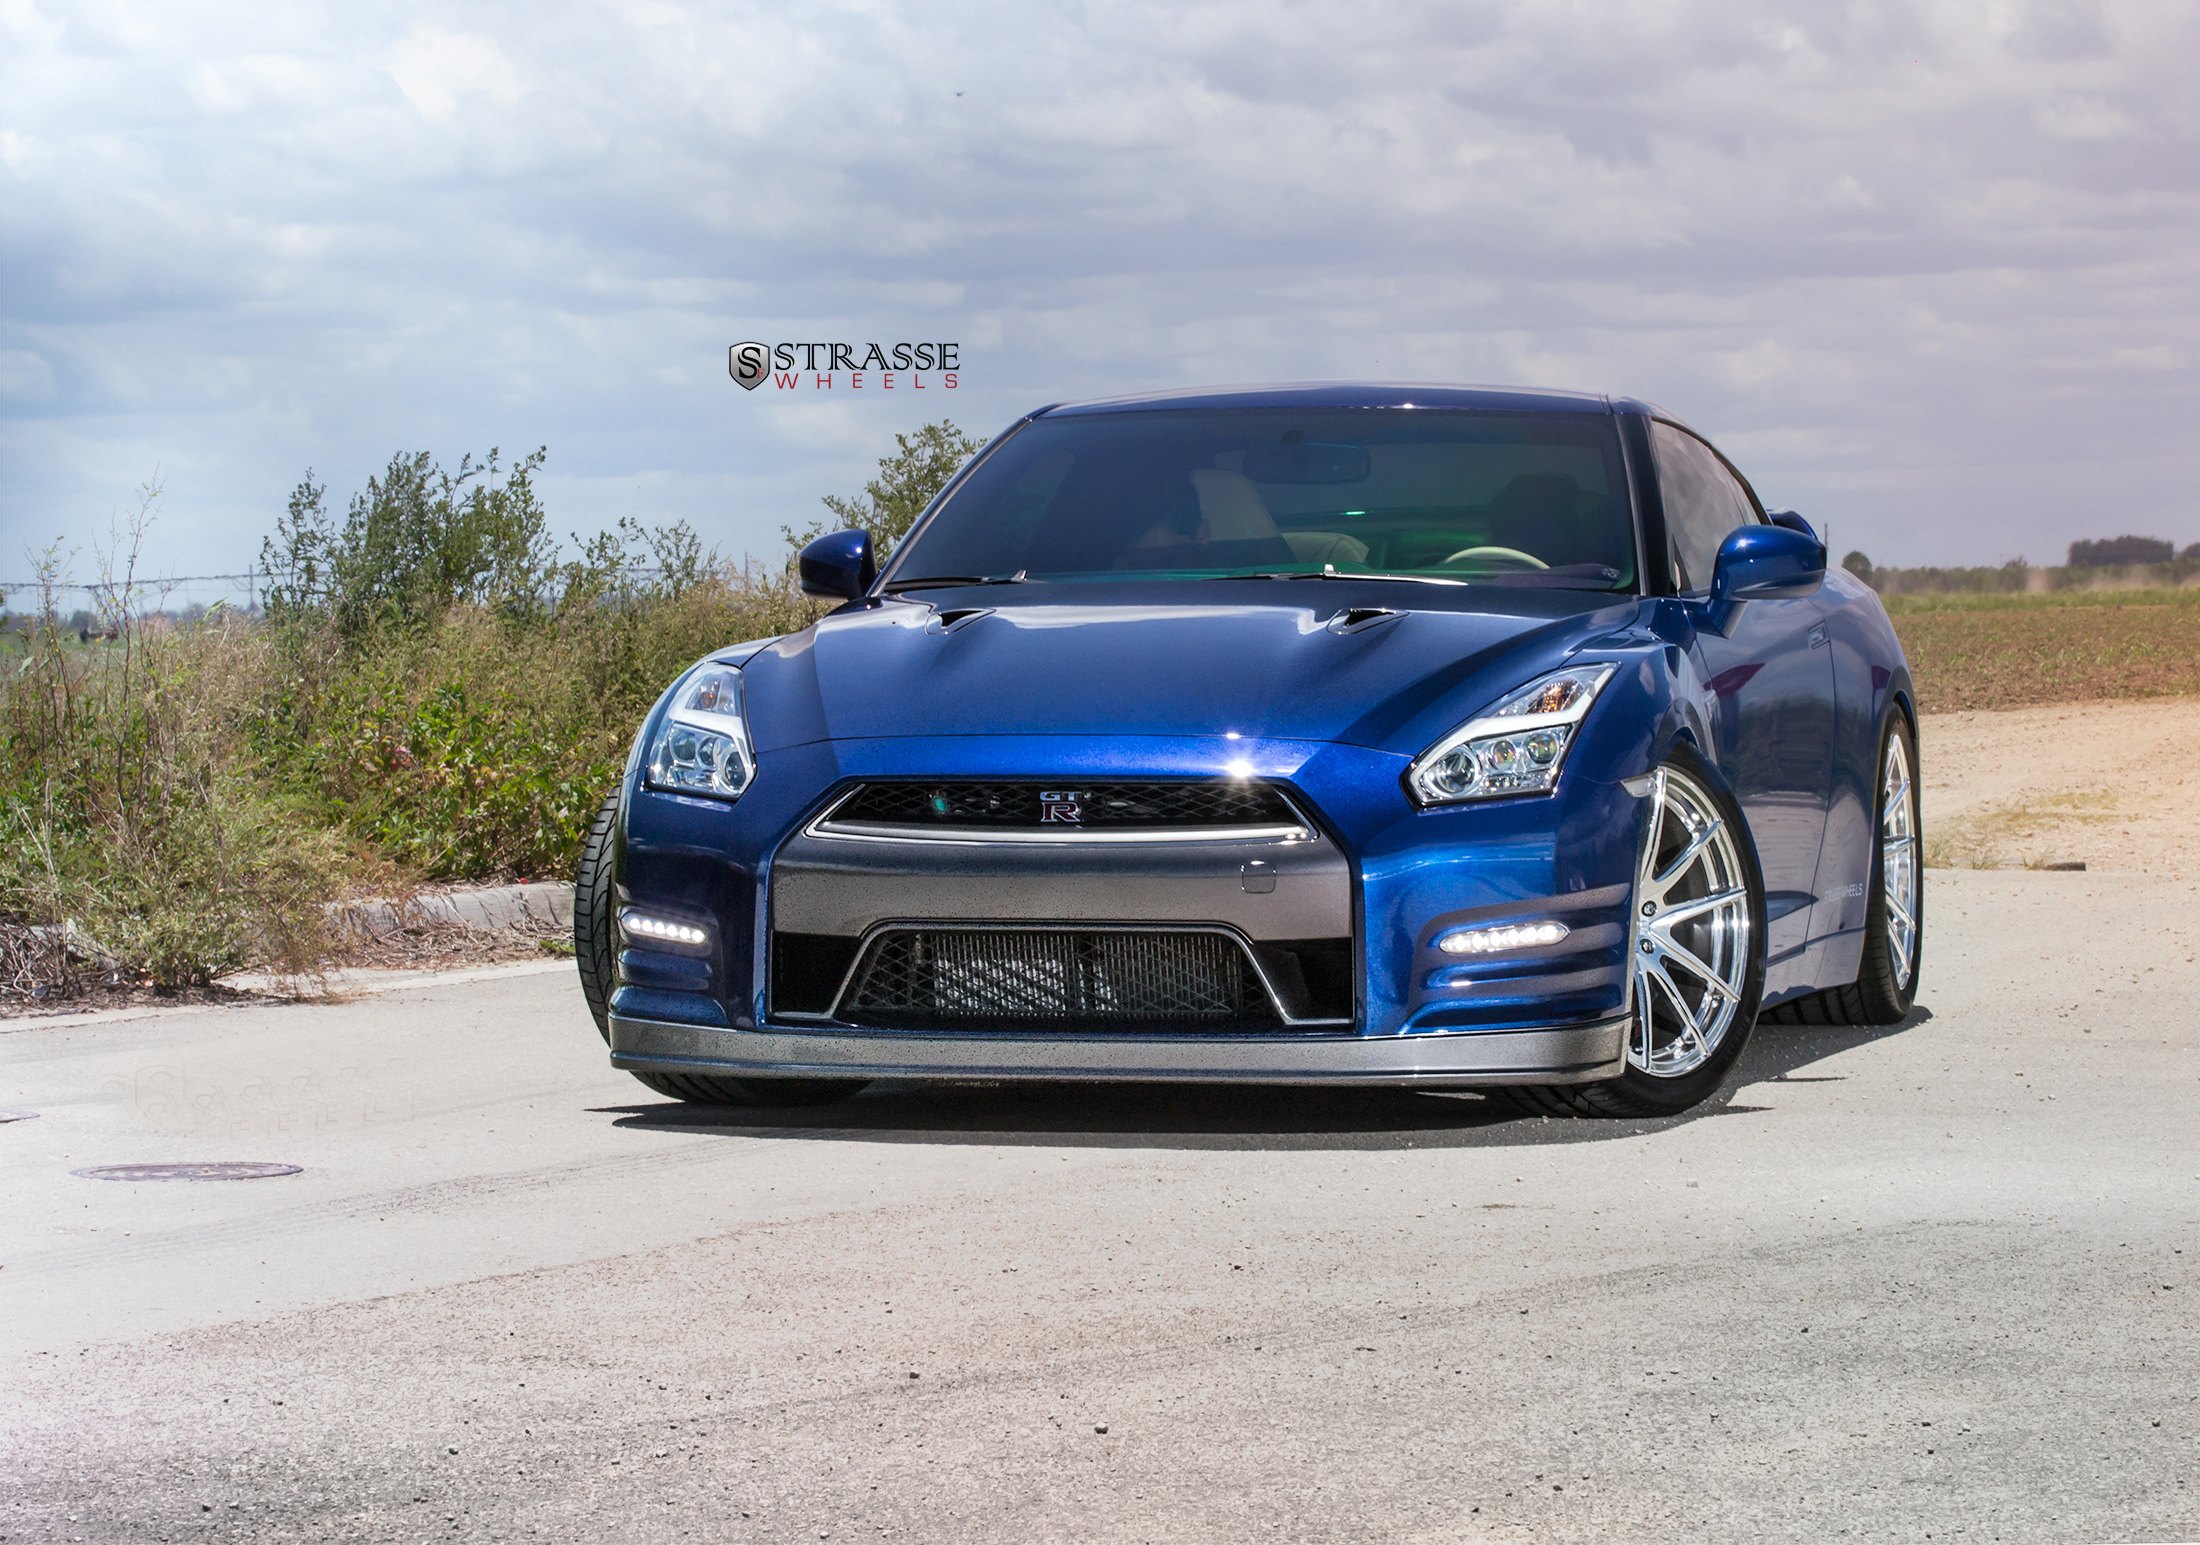 Hood with Air Vents on Custom Blue Nissan GT-R - Photo by Strasse Forged